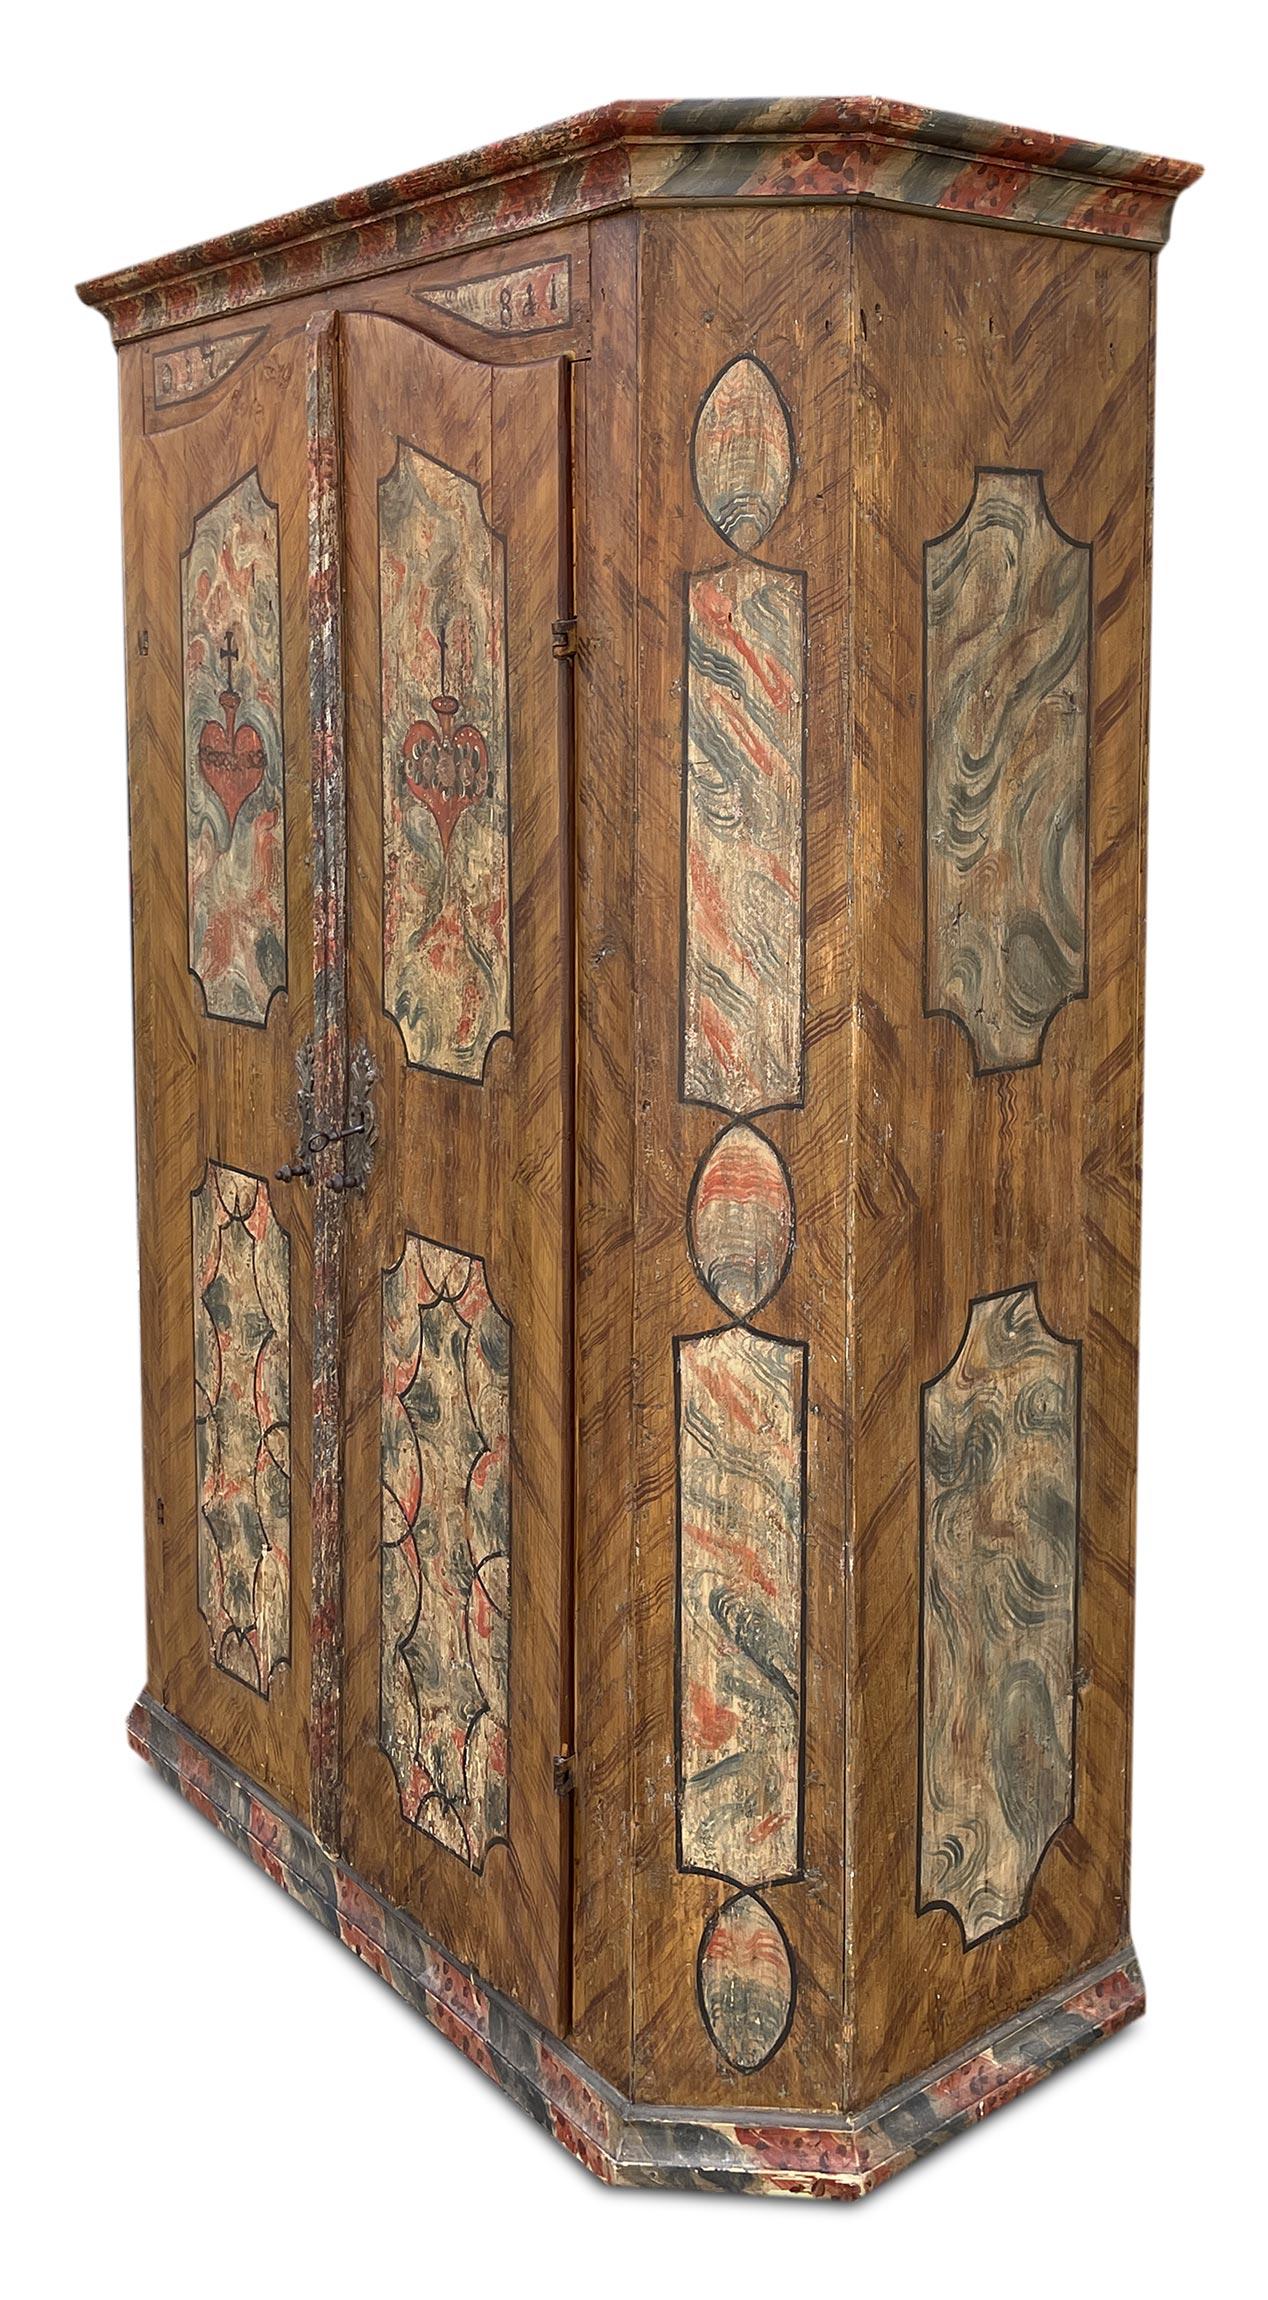 Tyrolean wardrobe dated 1781

Measurements: H. 185 cm - W. 140 cm (150 cm at the frames)  - D. 53 cm (58 cm at the frames)
Essence: Fir
Period: 1781
Origin: Tyrol

Description:
Tyrolean wardrobe, with two doors, entirely painted in ocher. The